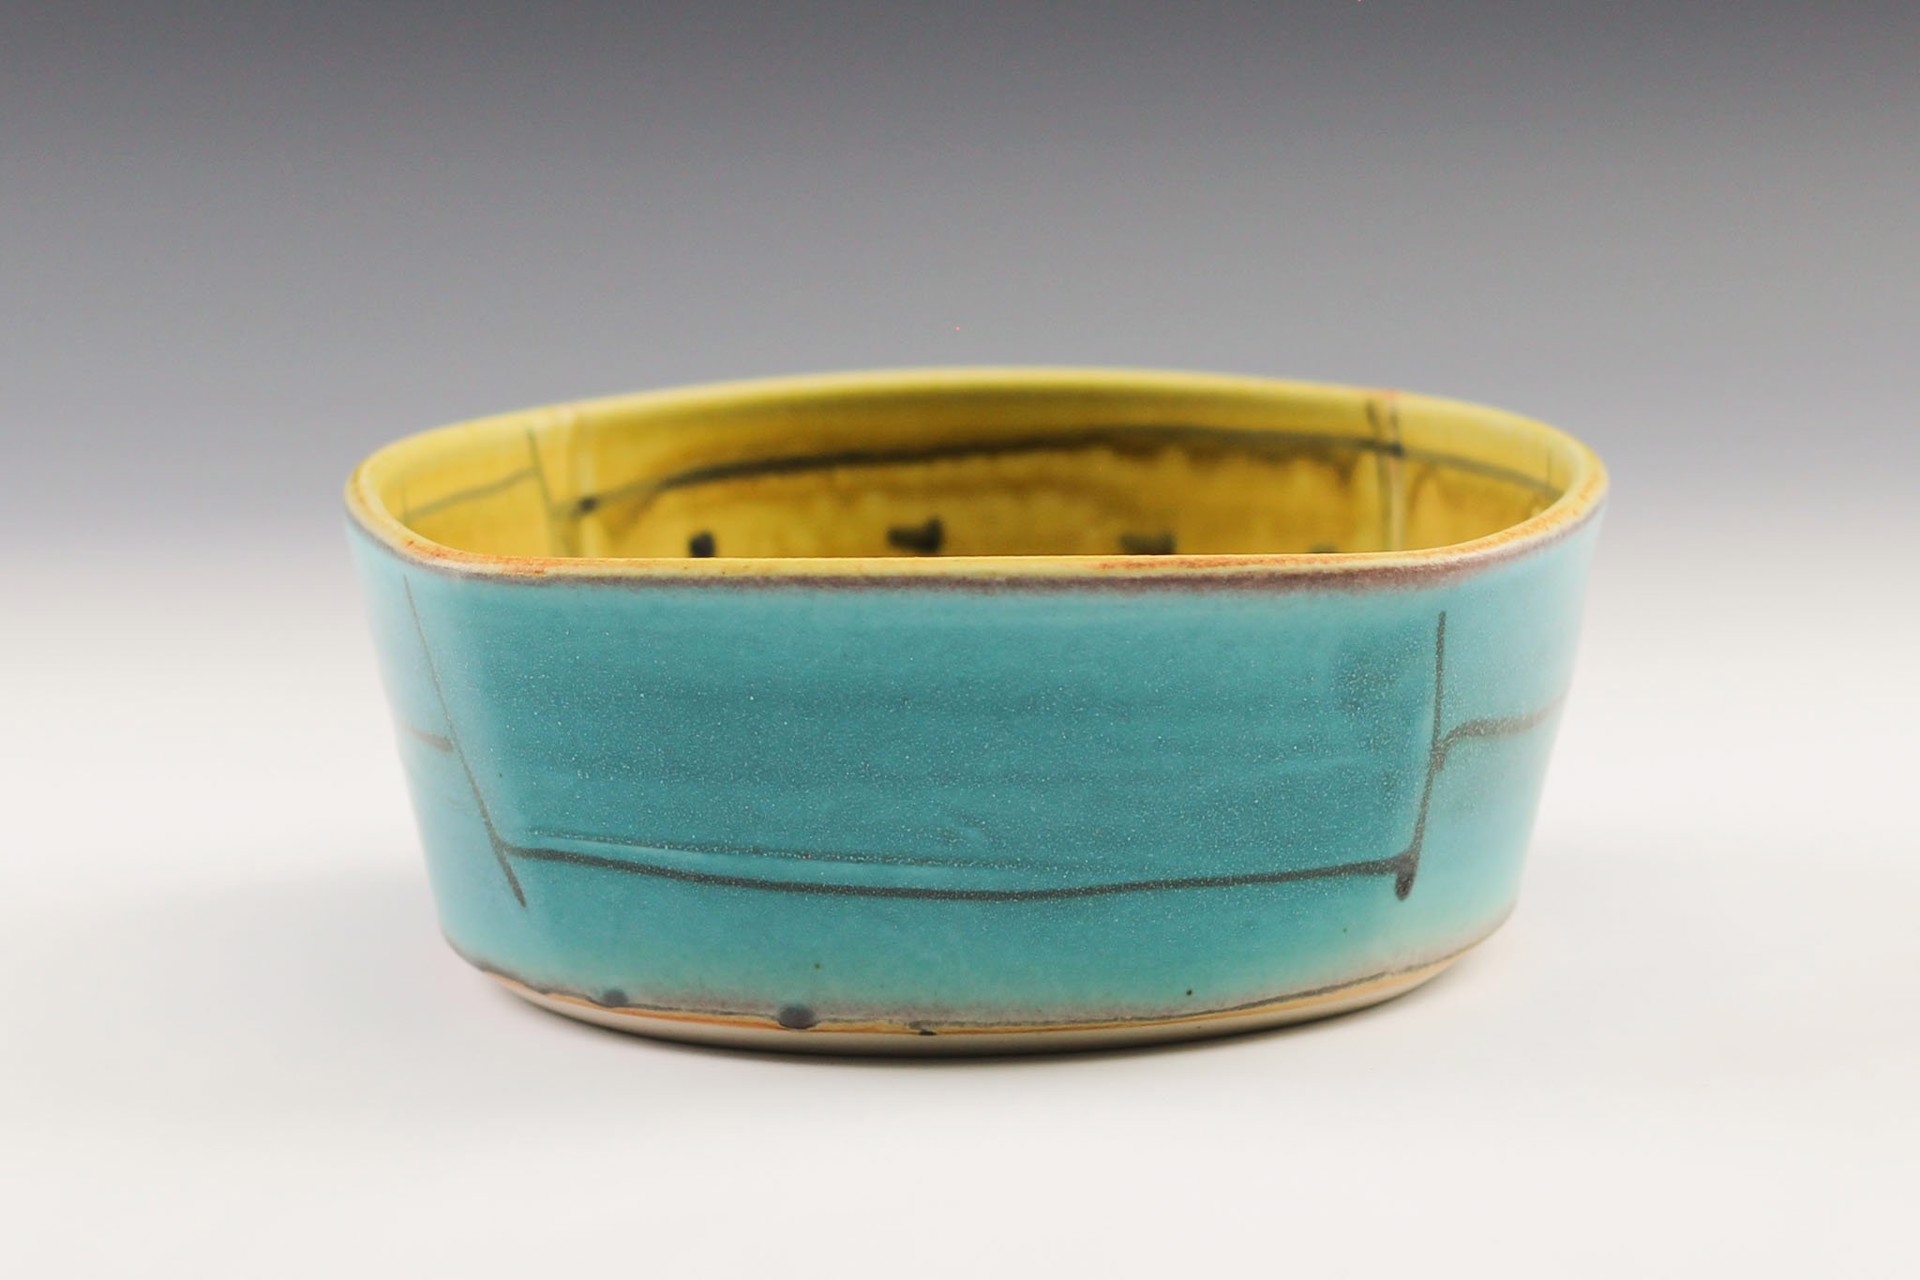 "Meg's" Bowl by Delores Fortuna